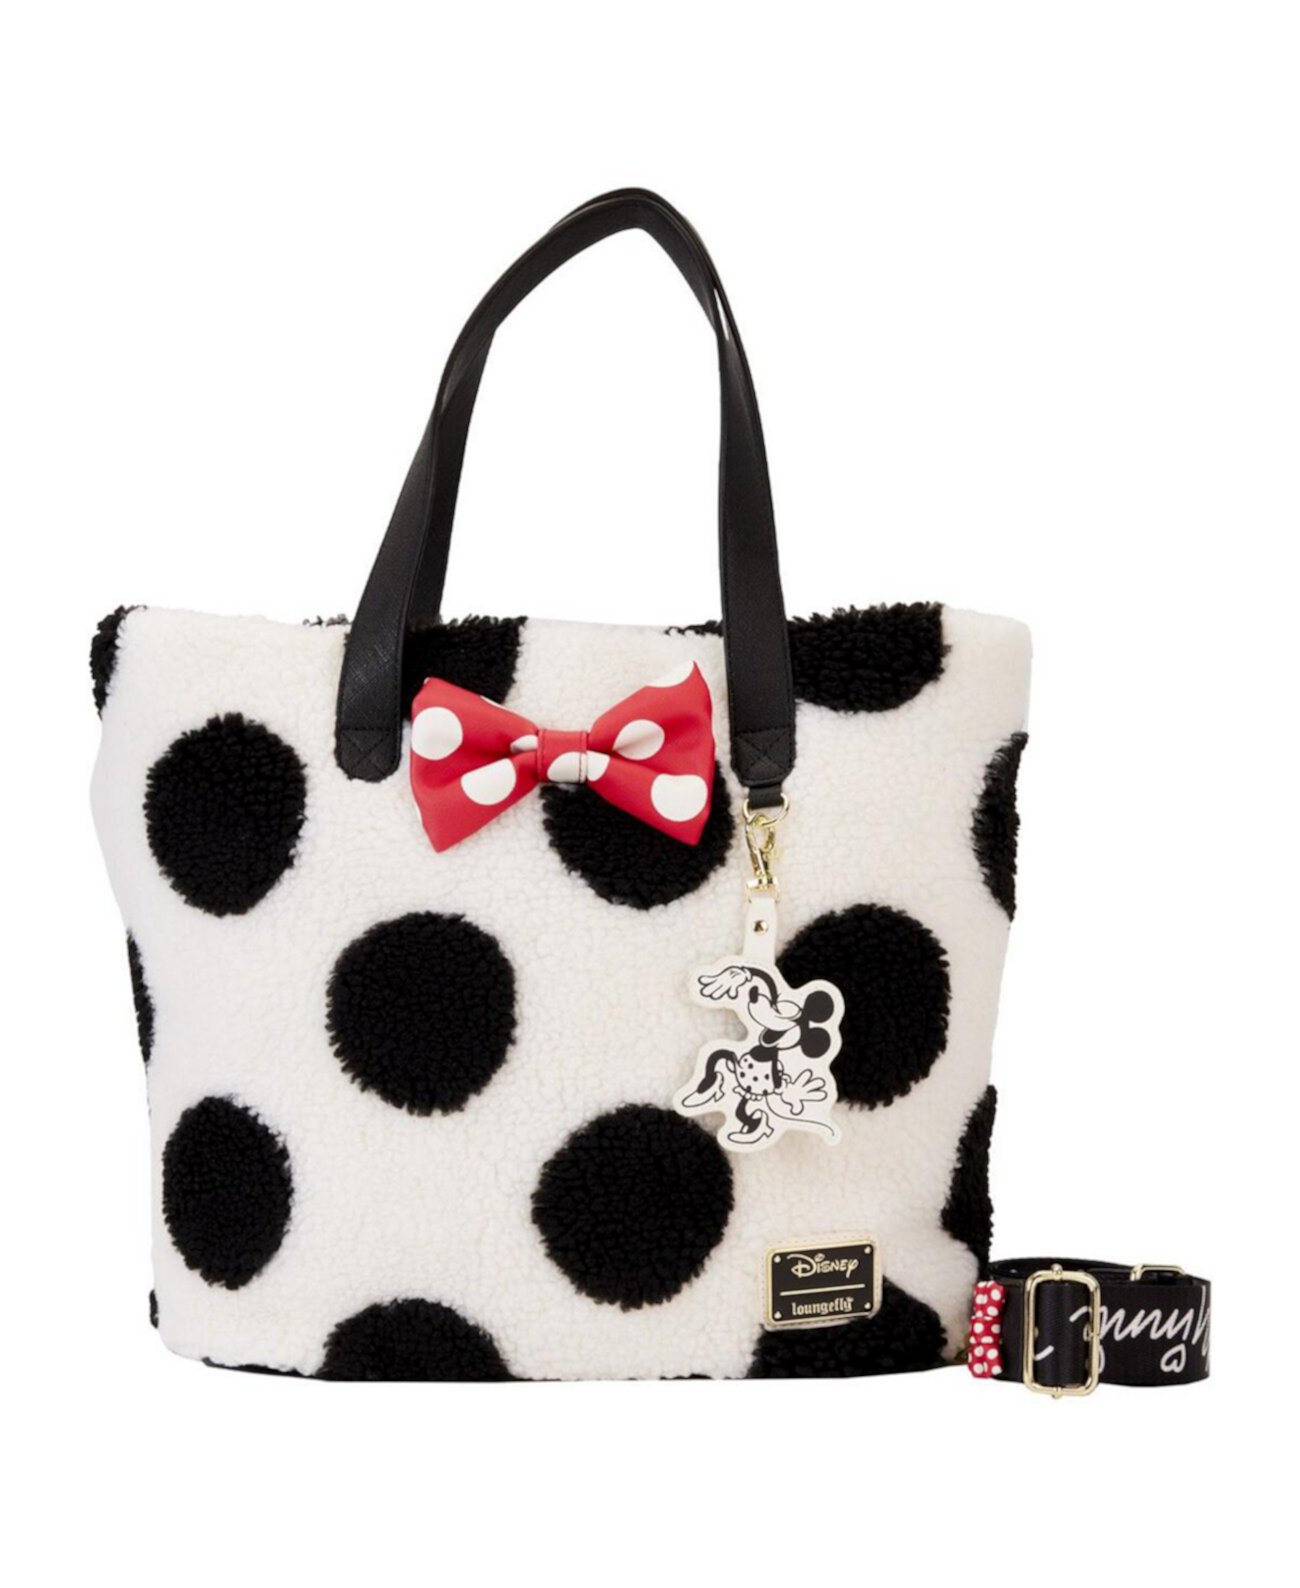 Mickey Friends Minnie Mouse Rocks the Dots Sherpa Tote Bag Loungefly